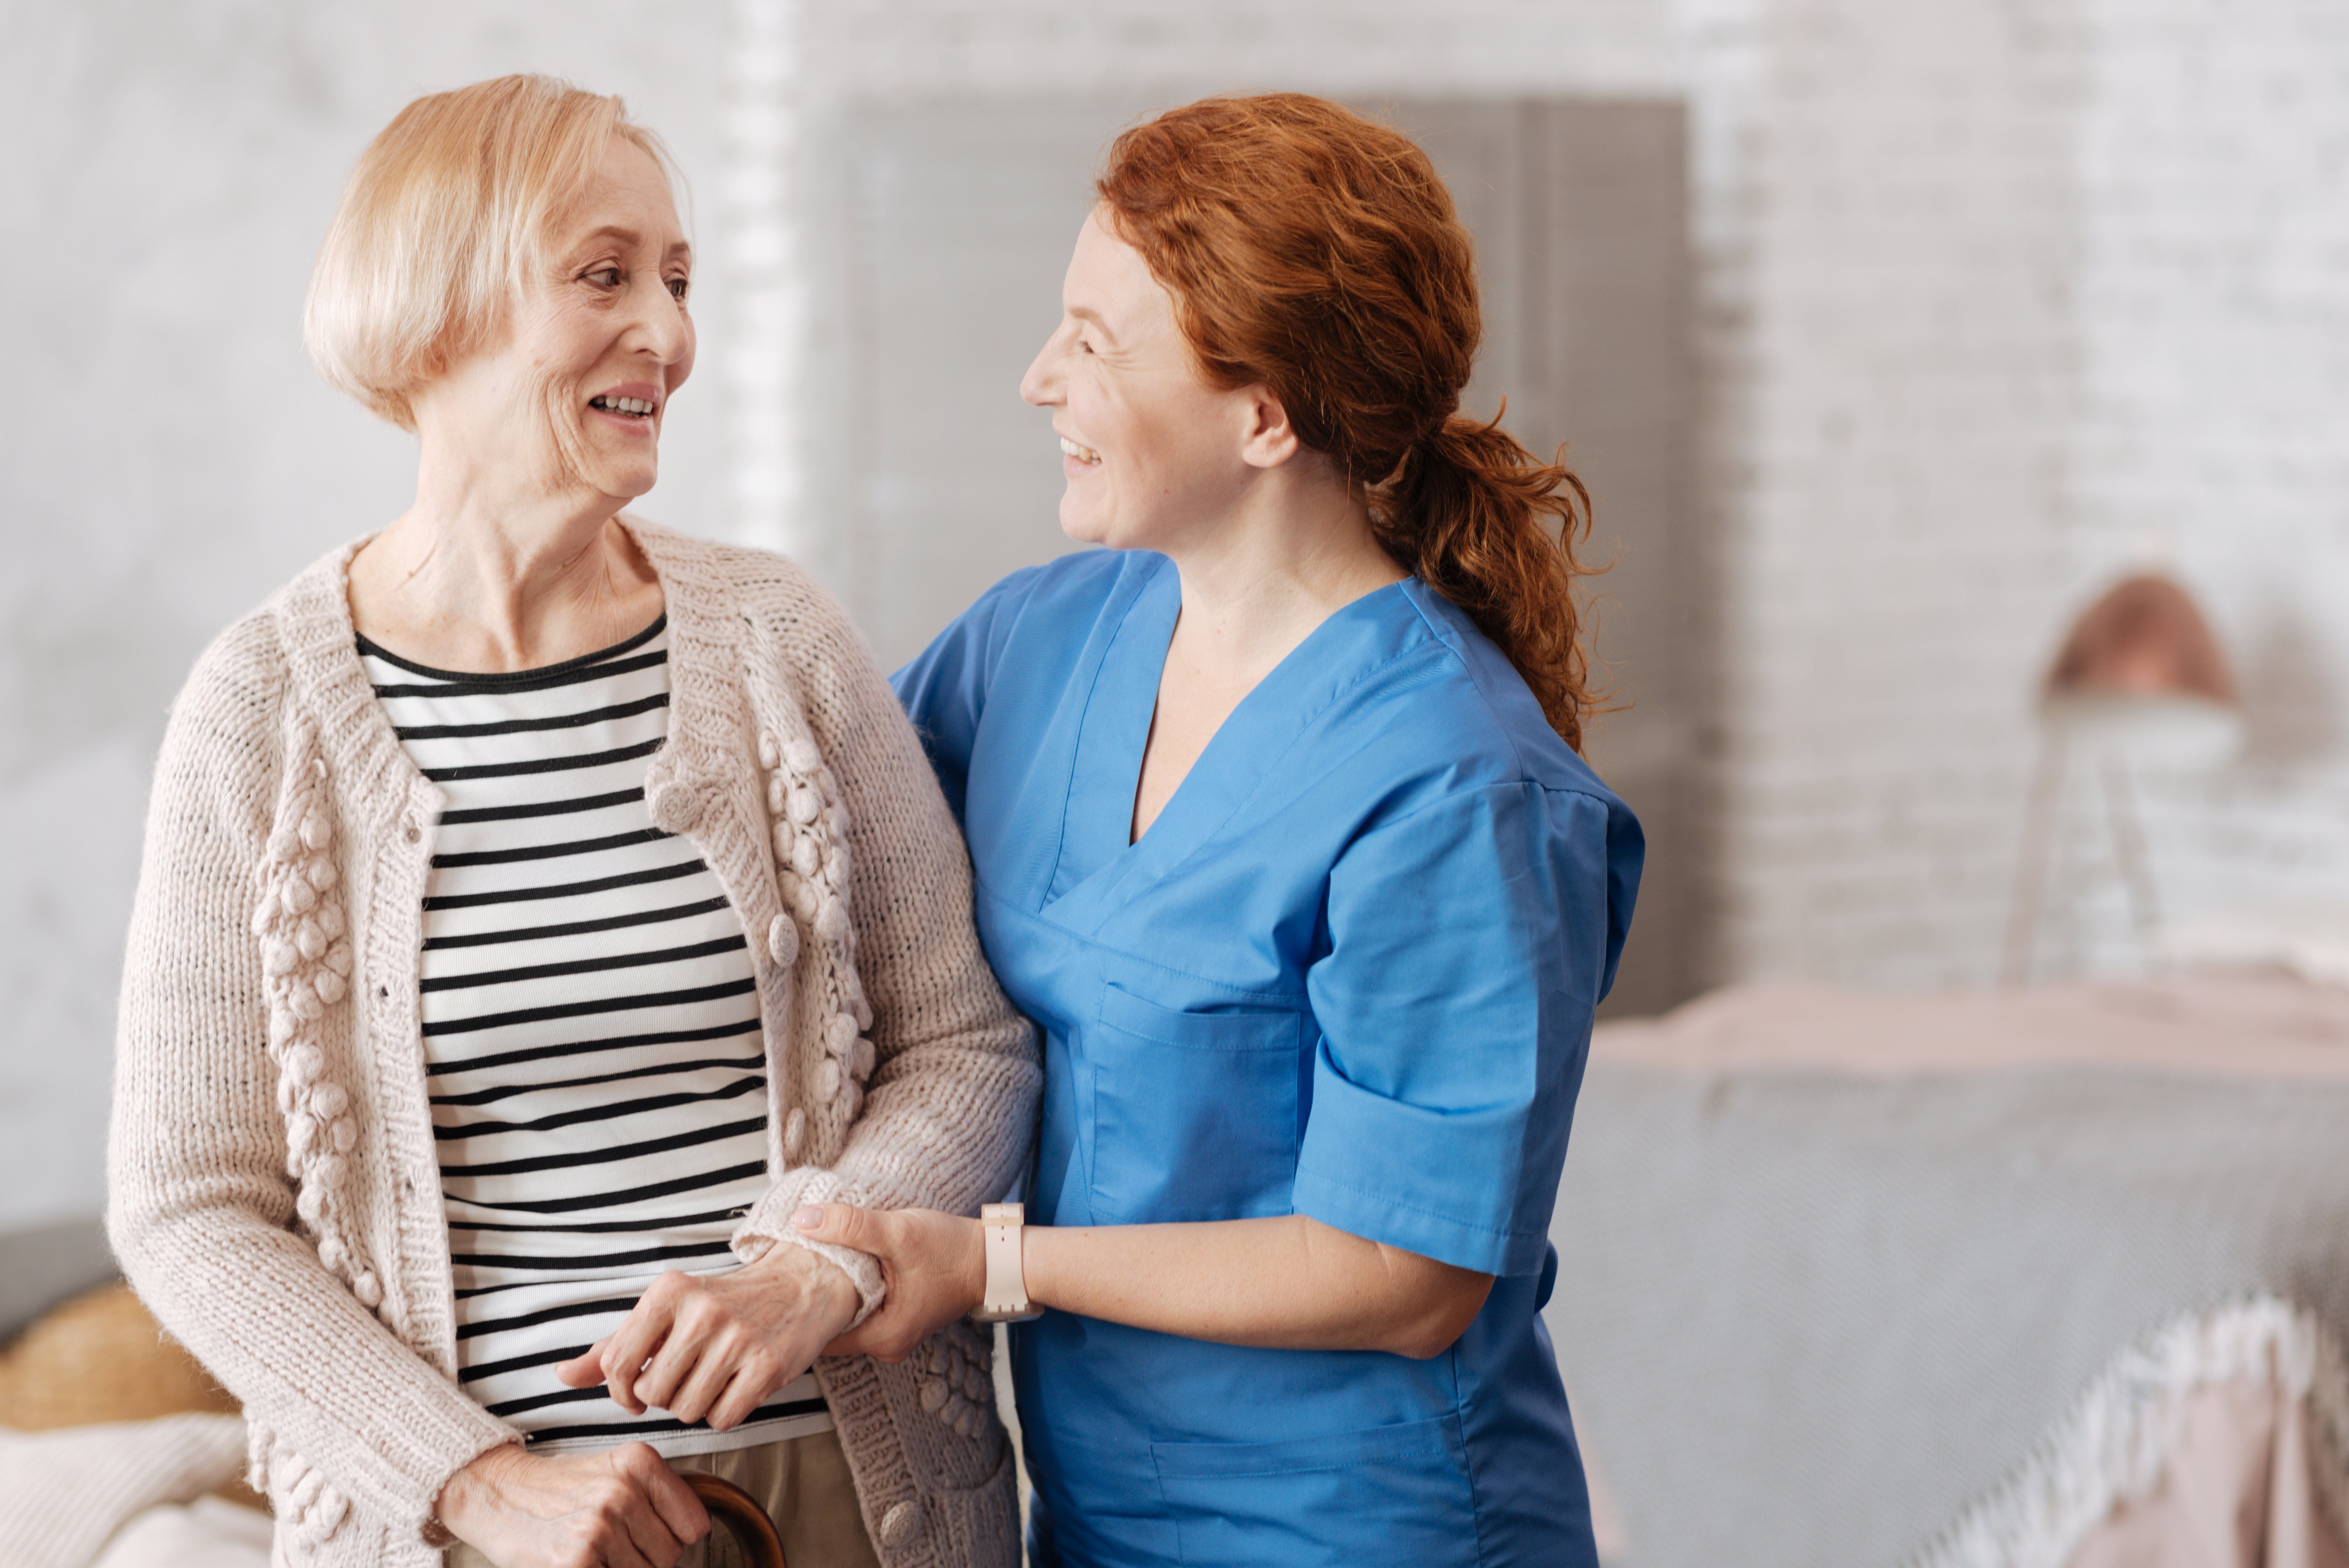 What Should My Caregiver Wear?